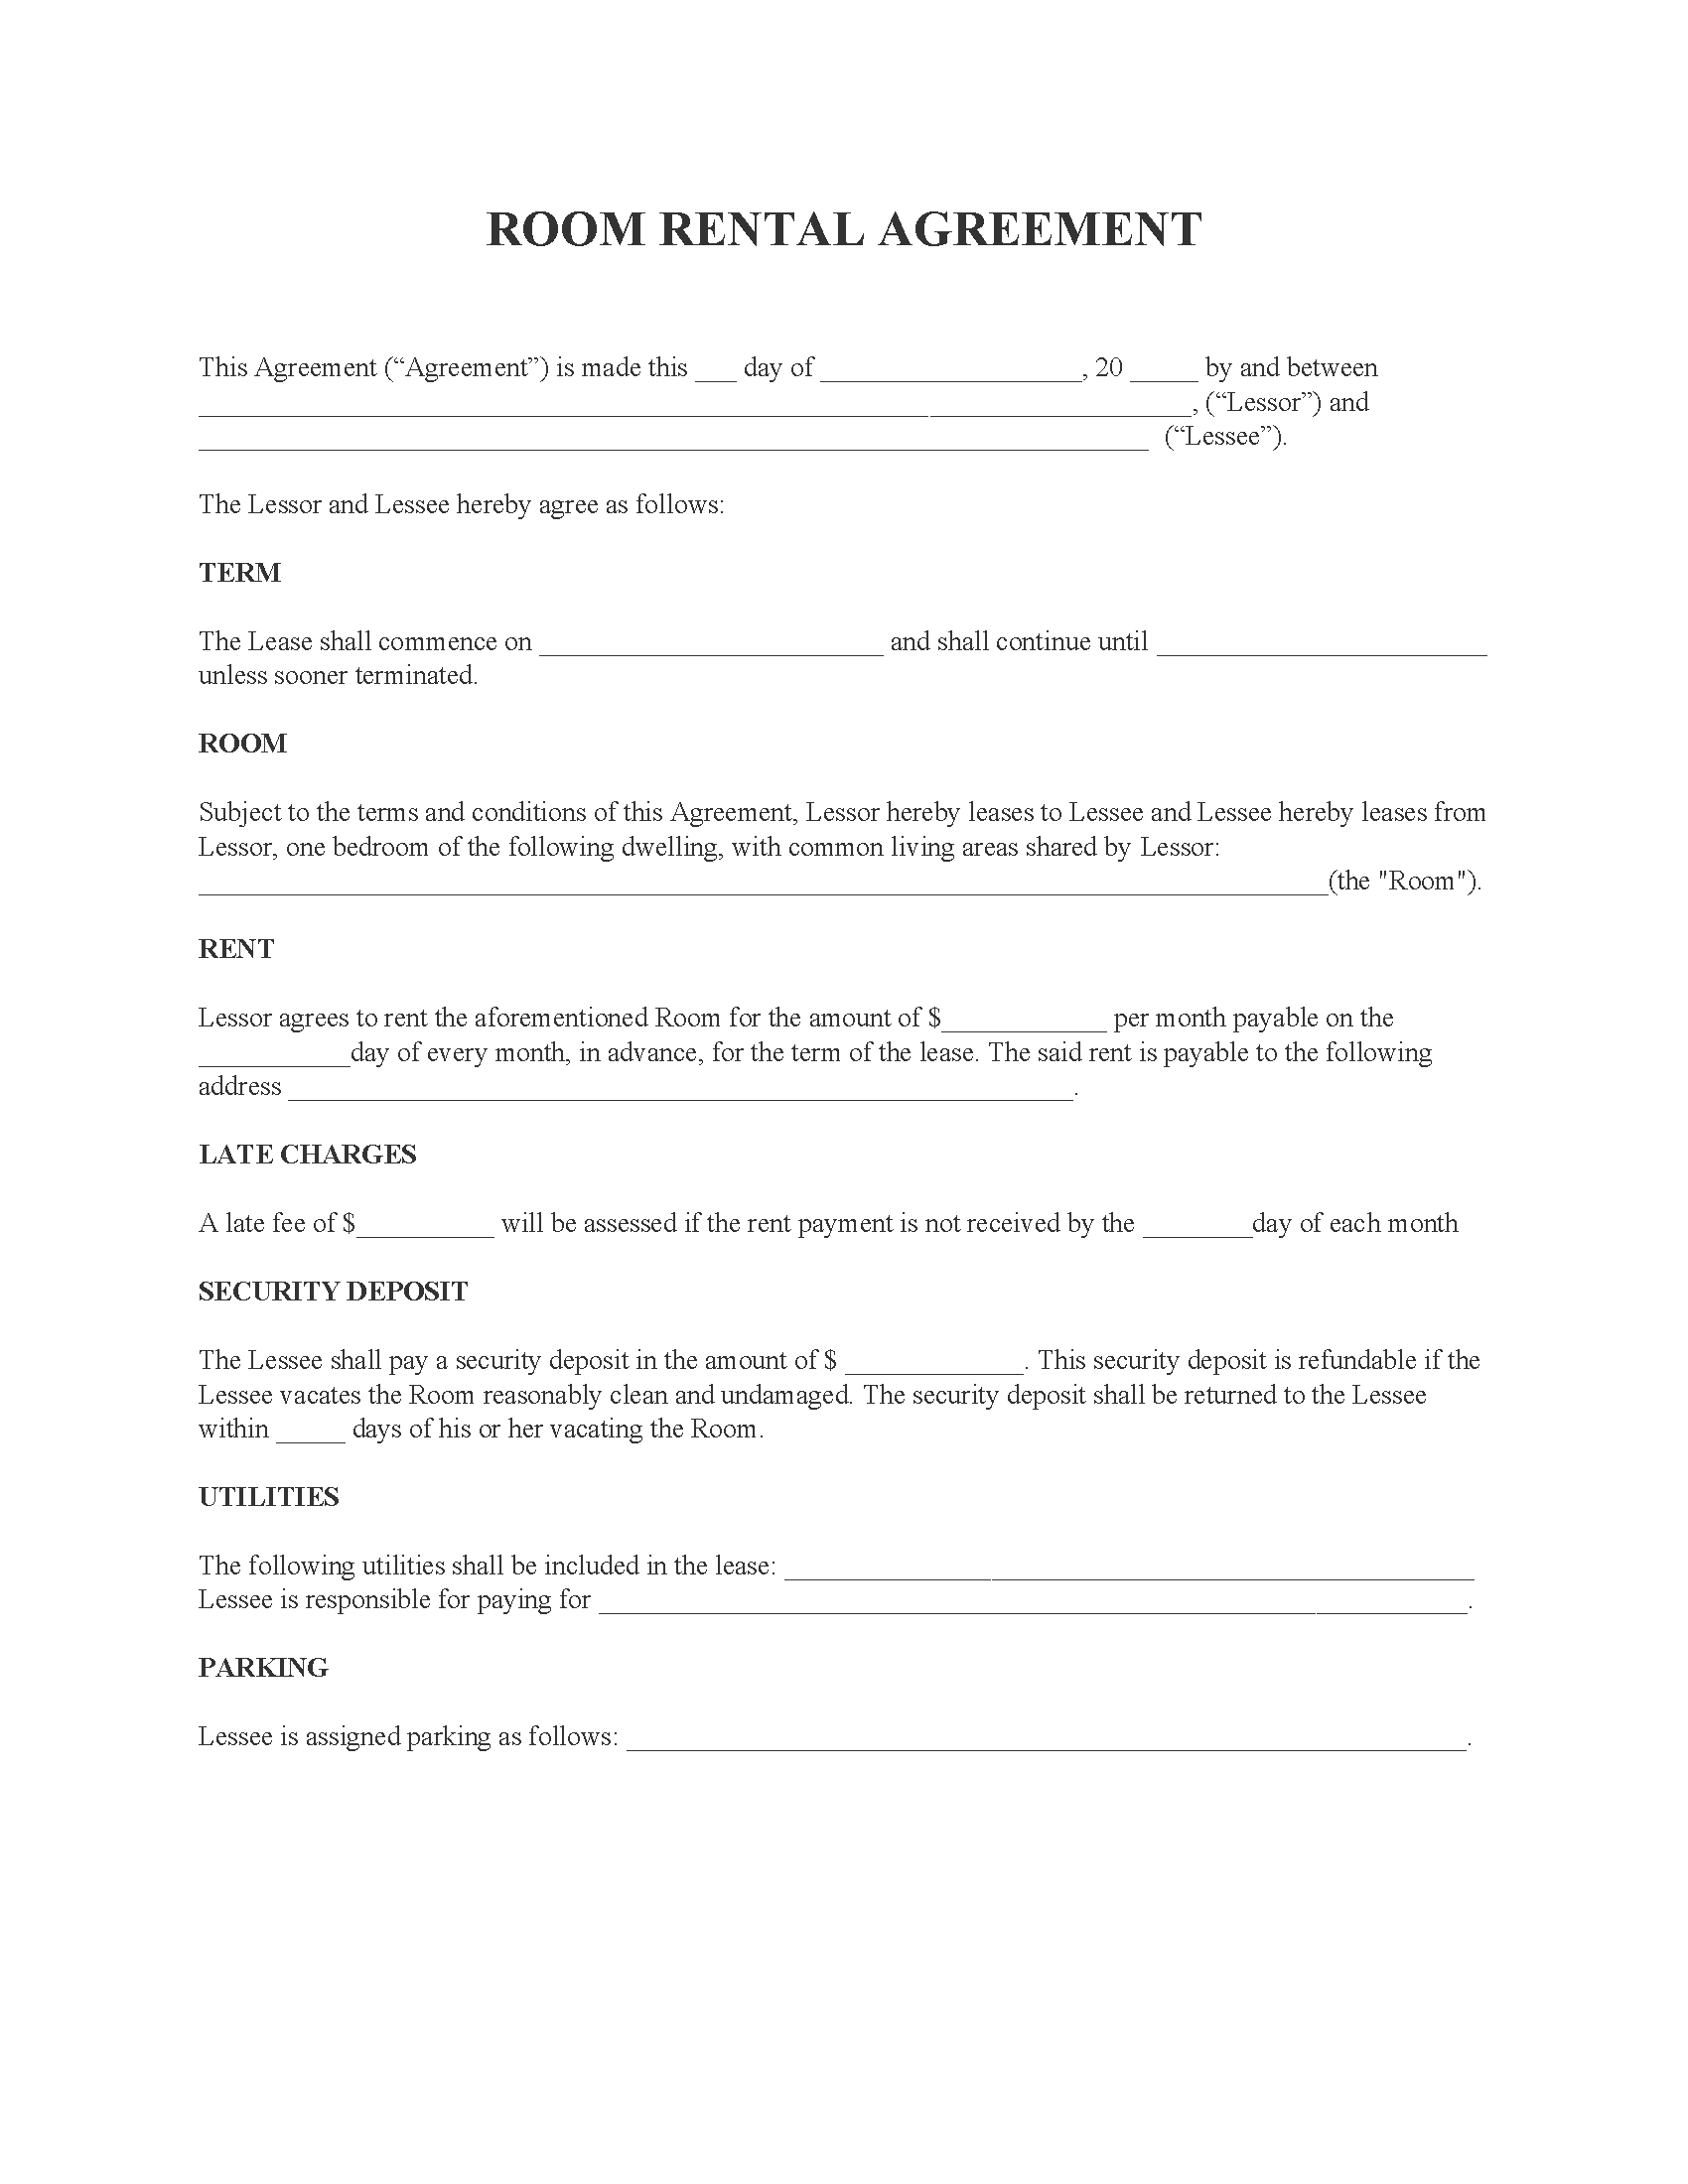 Room Rental Agreement Fillable PDF Free Printable Legal Forms